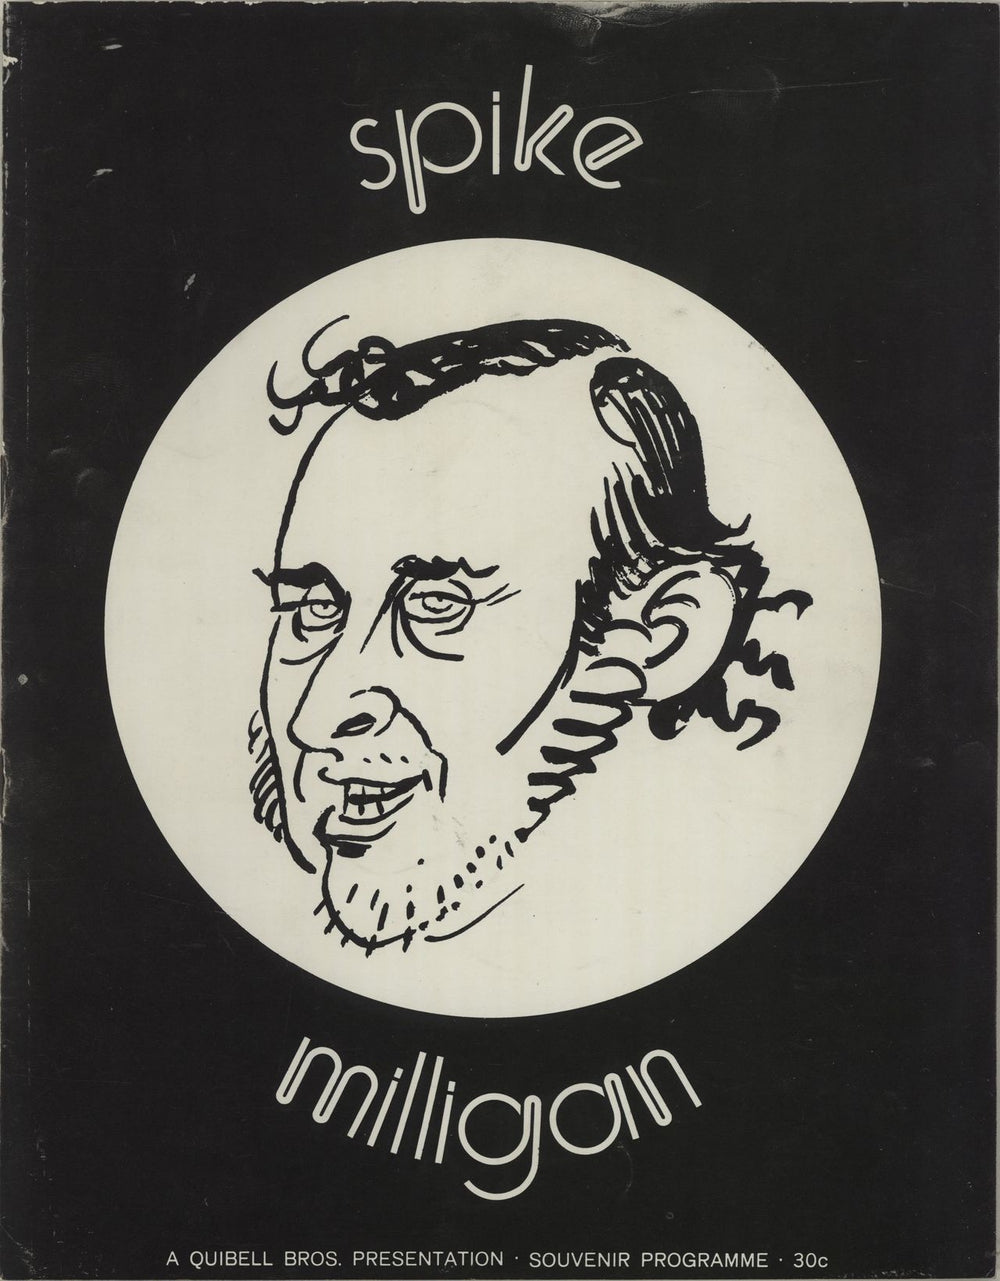 Spike Milligan The Spike Milligan Show South African tour programme TOUR PROGRAMME